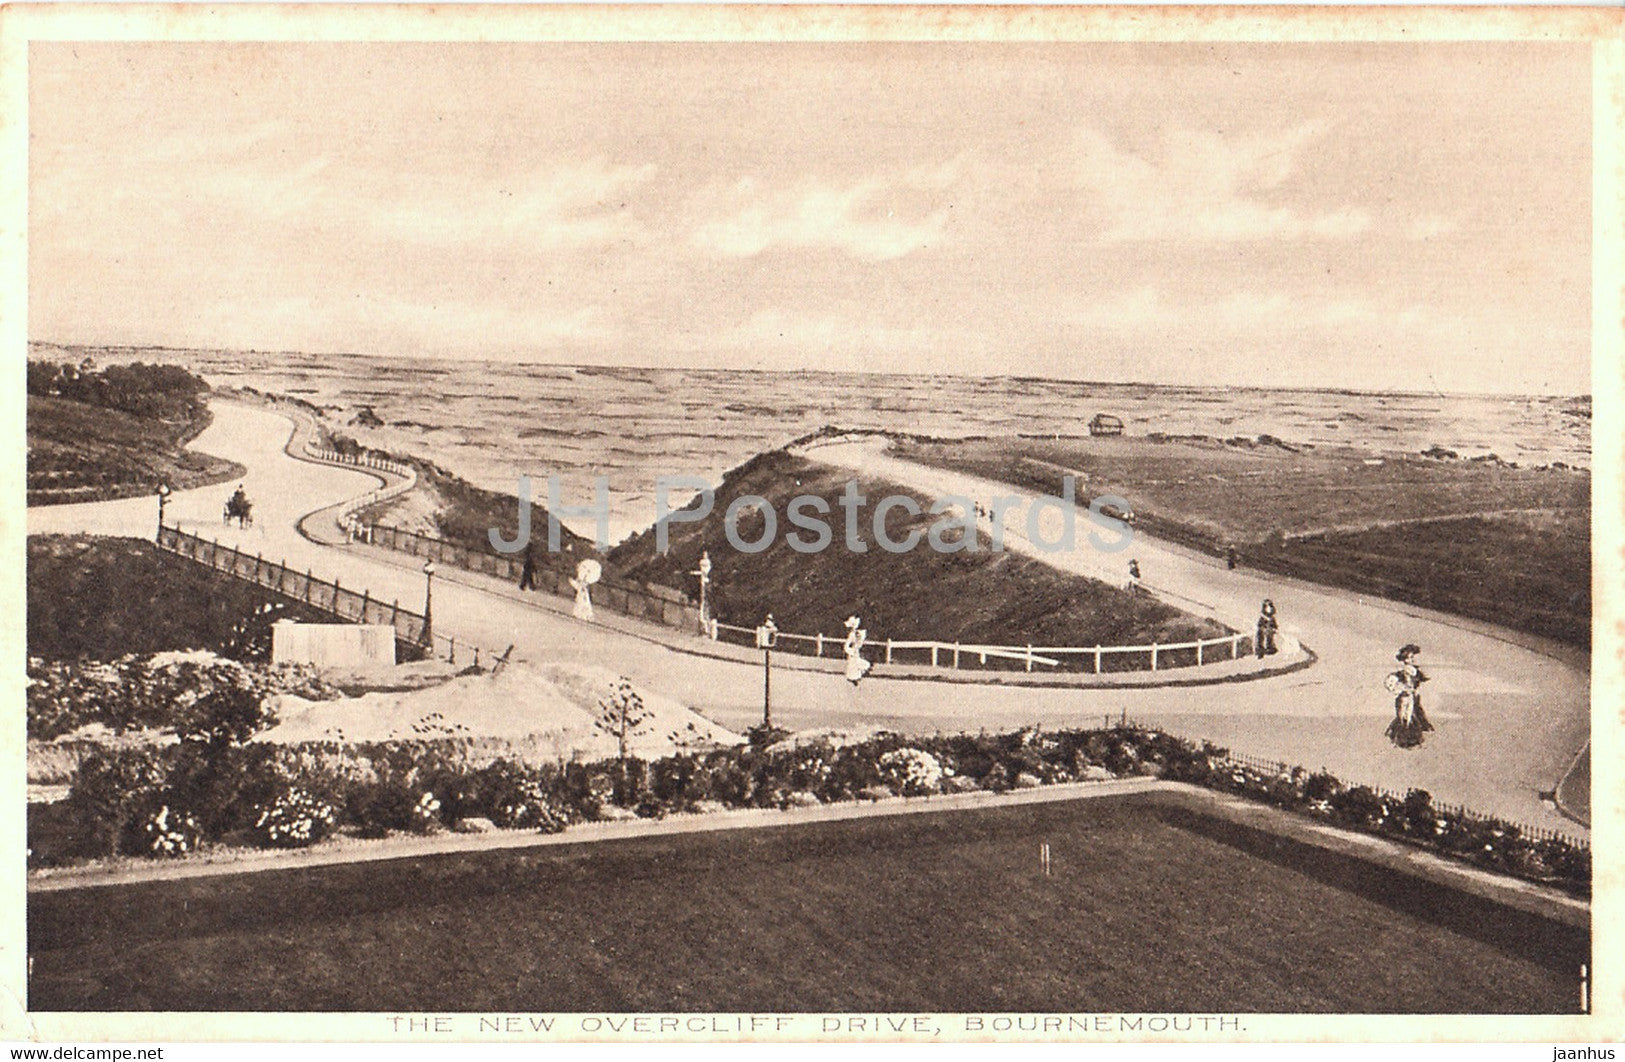 Bournemouth - The New Overcliff Drive - old postcard - England - United Kingdom - unused - JH Postcards